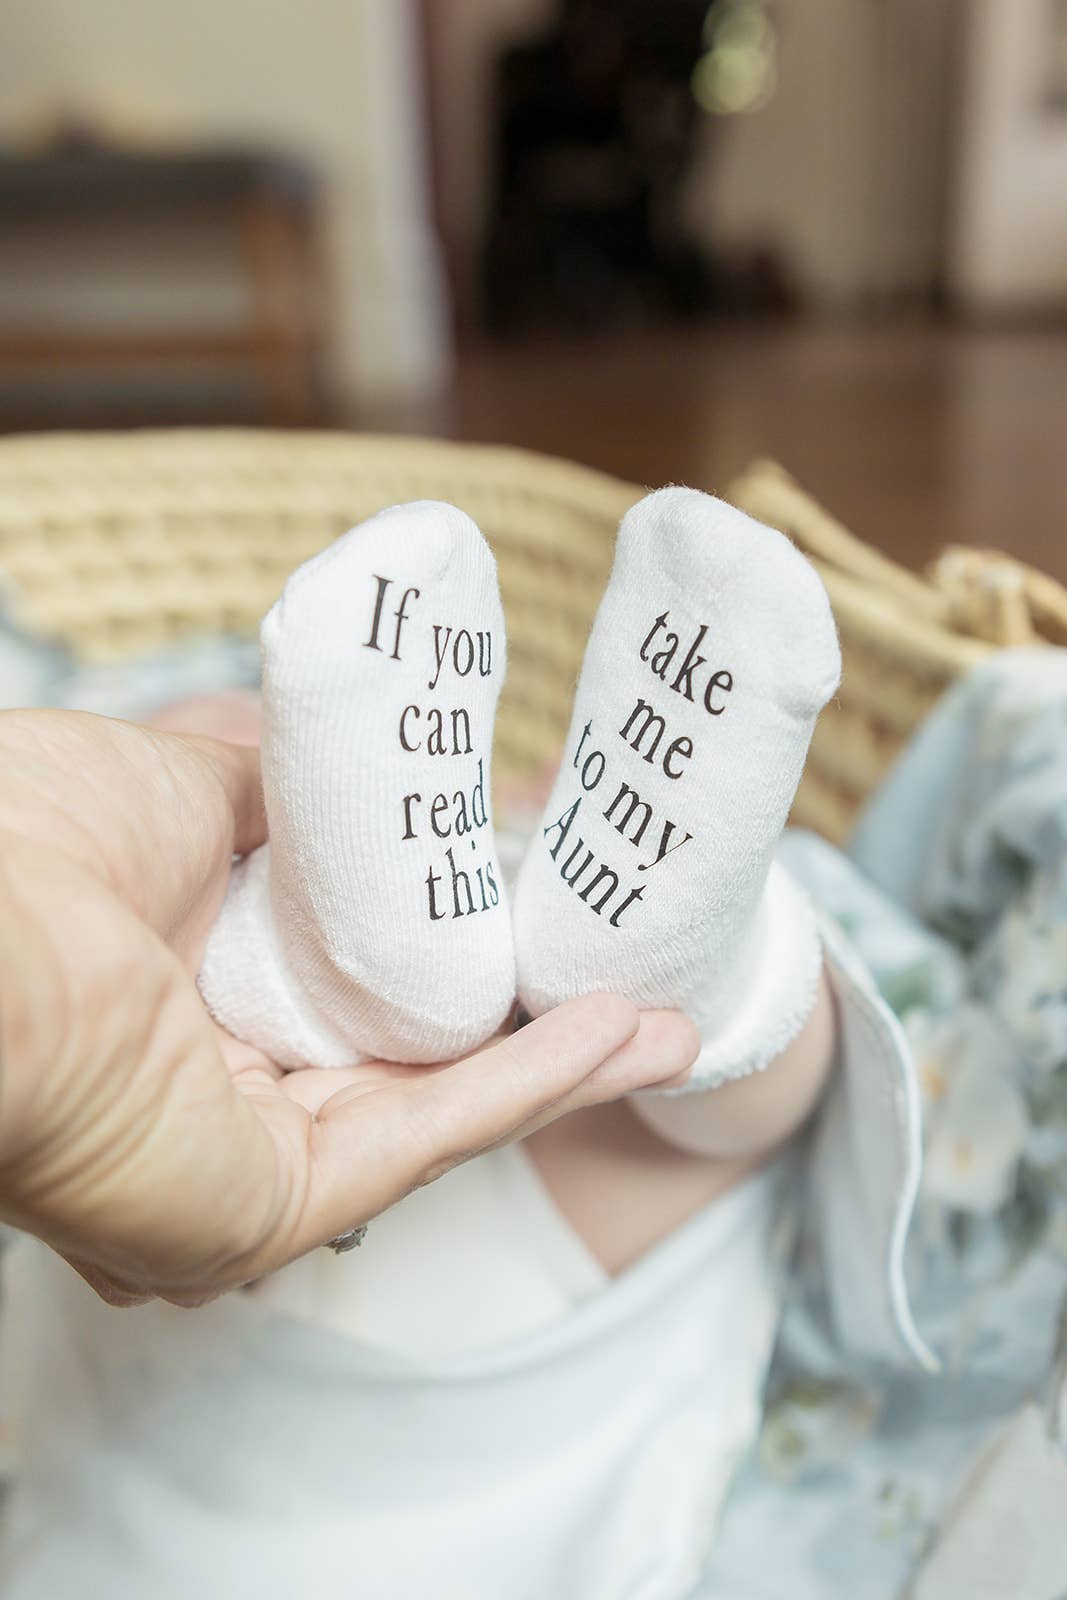 Personalized Baby Gifts for Newborns | Spreadshirt